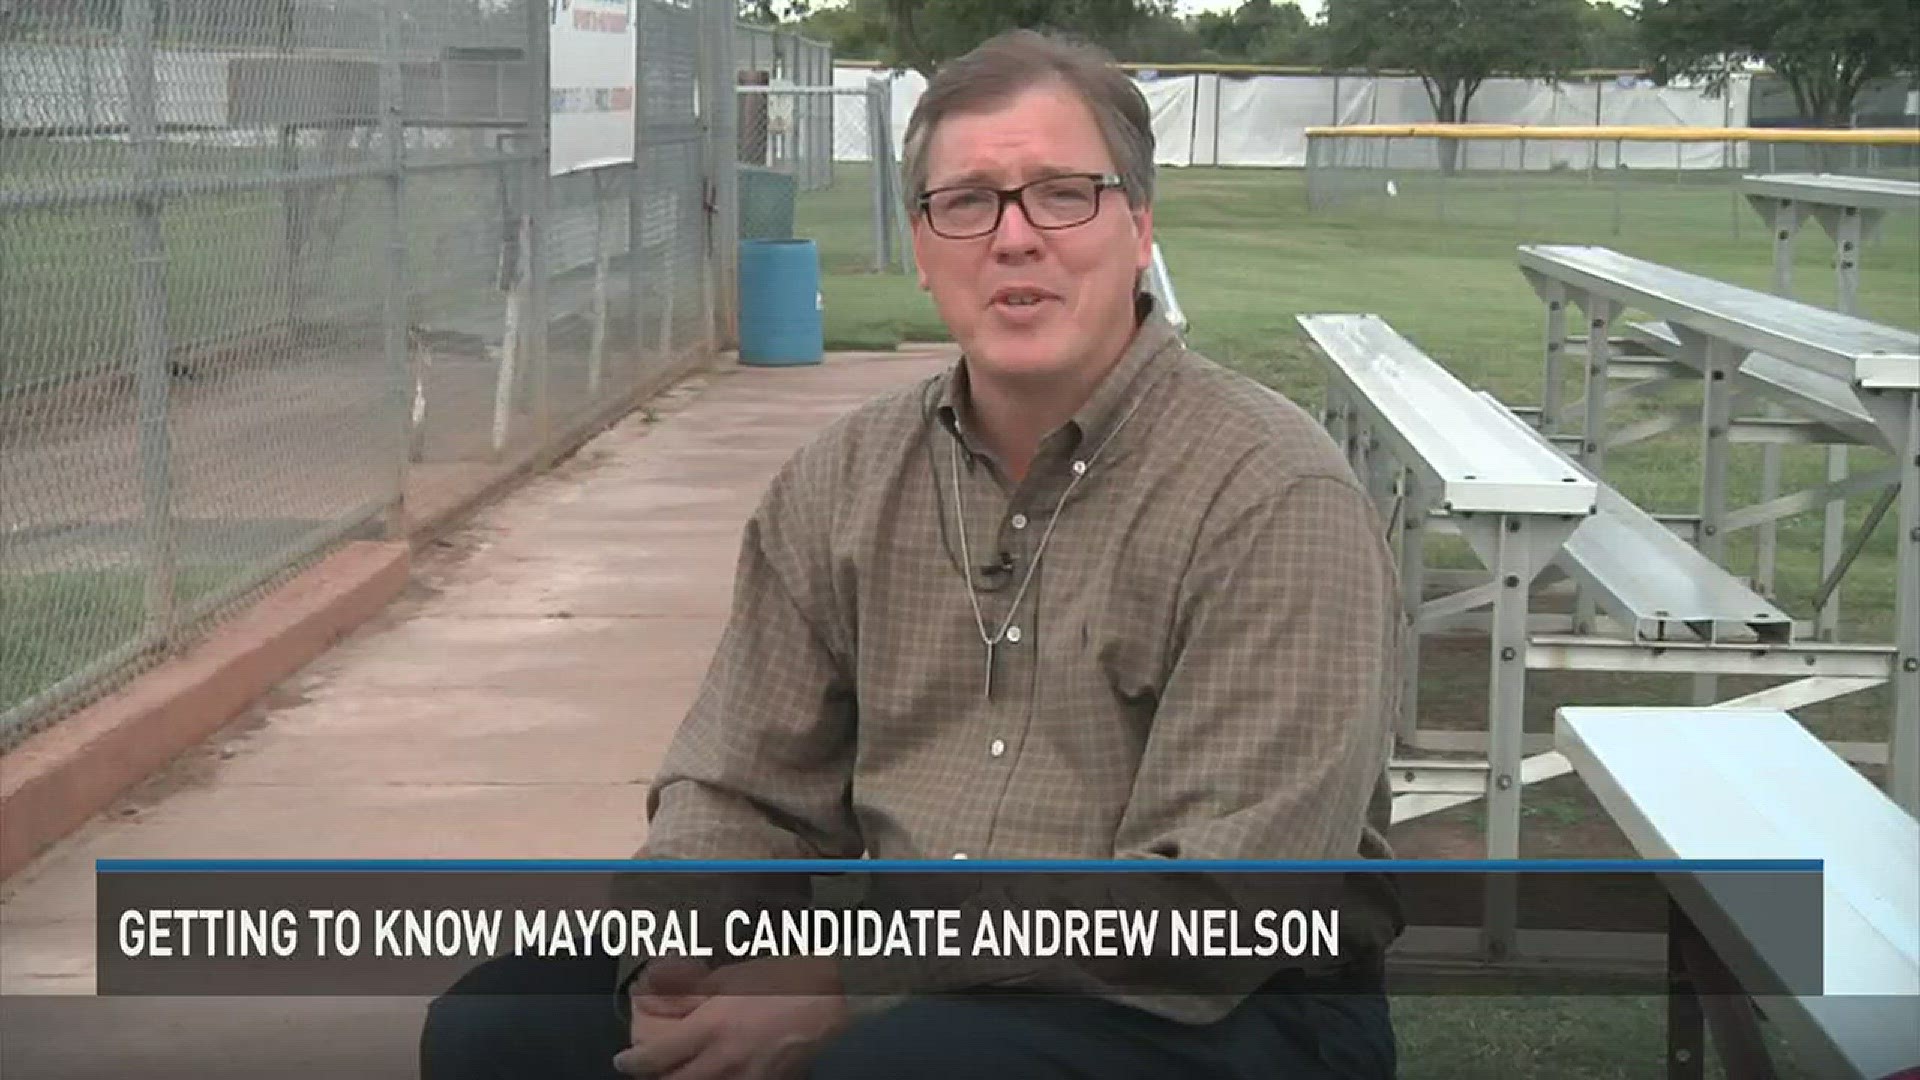 Andrew Nelson tells us why he wants to be the mayor of Bryan.